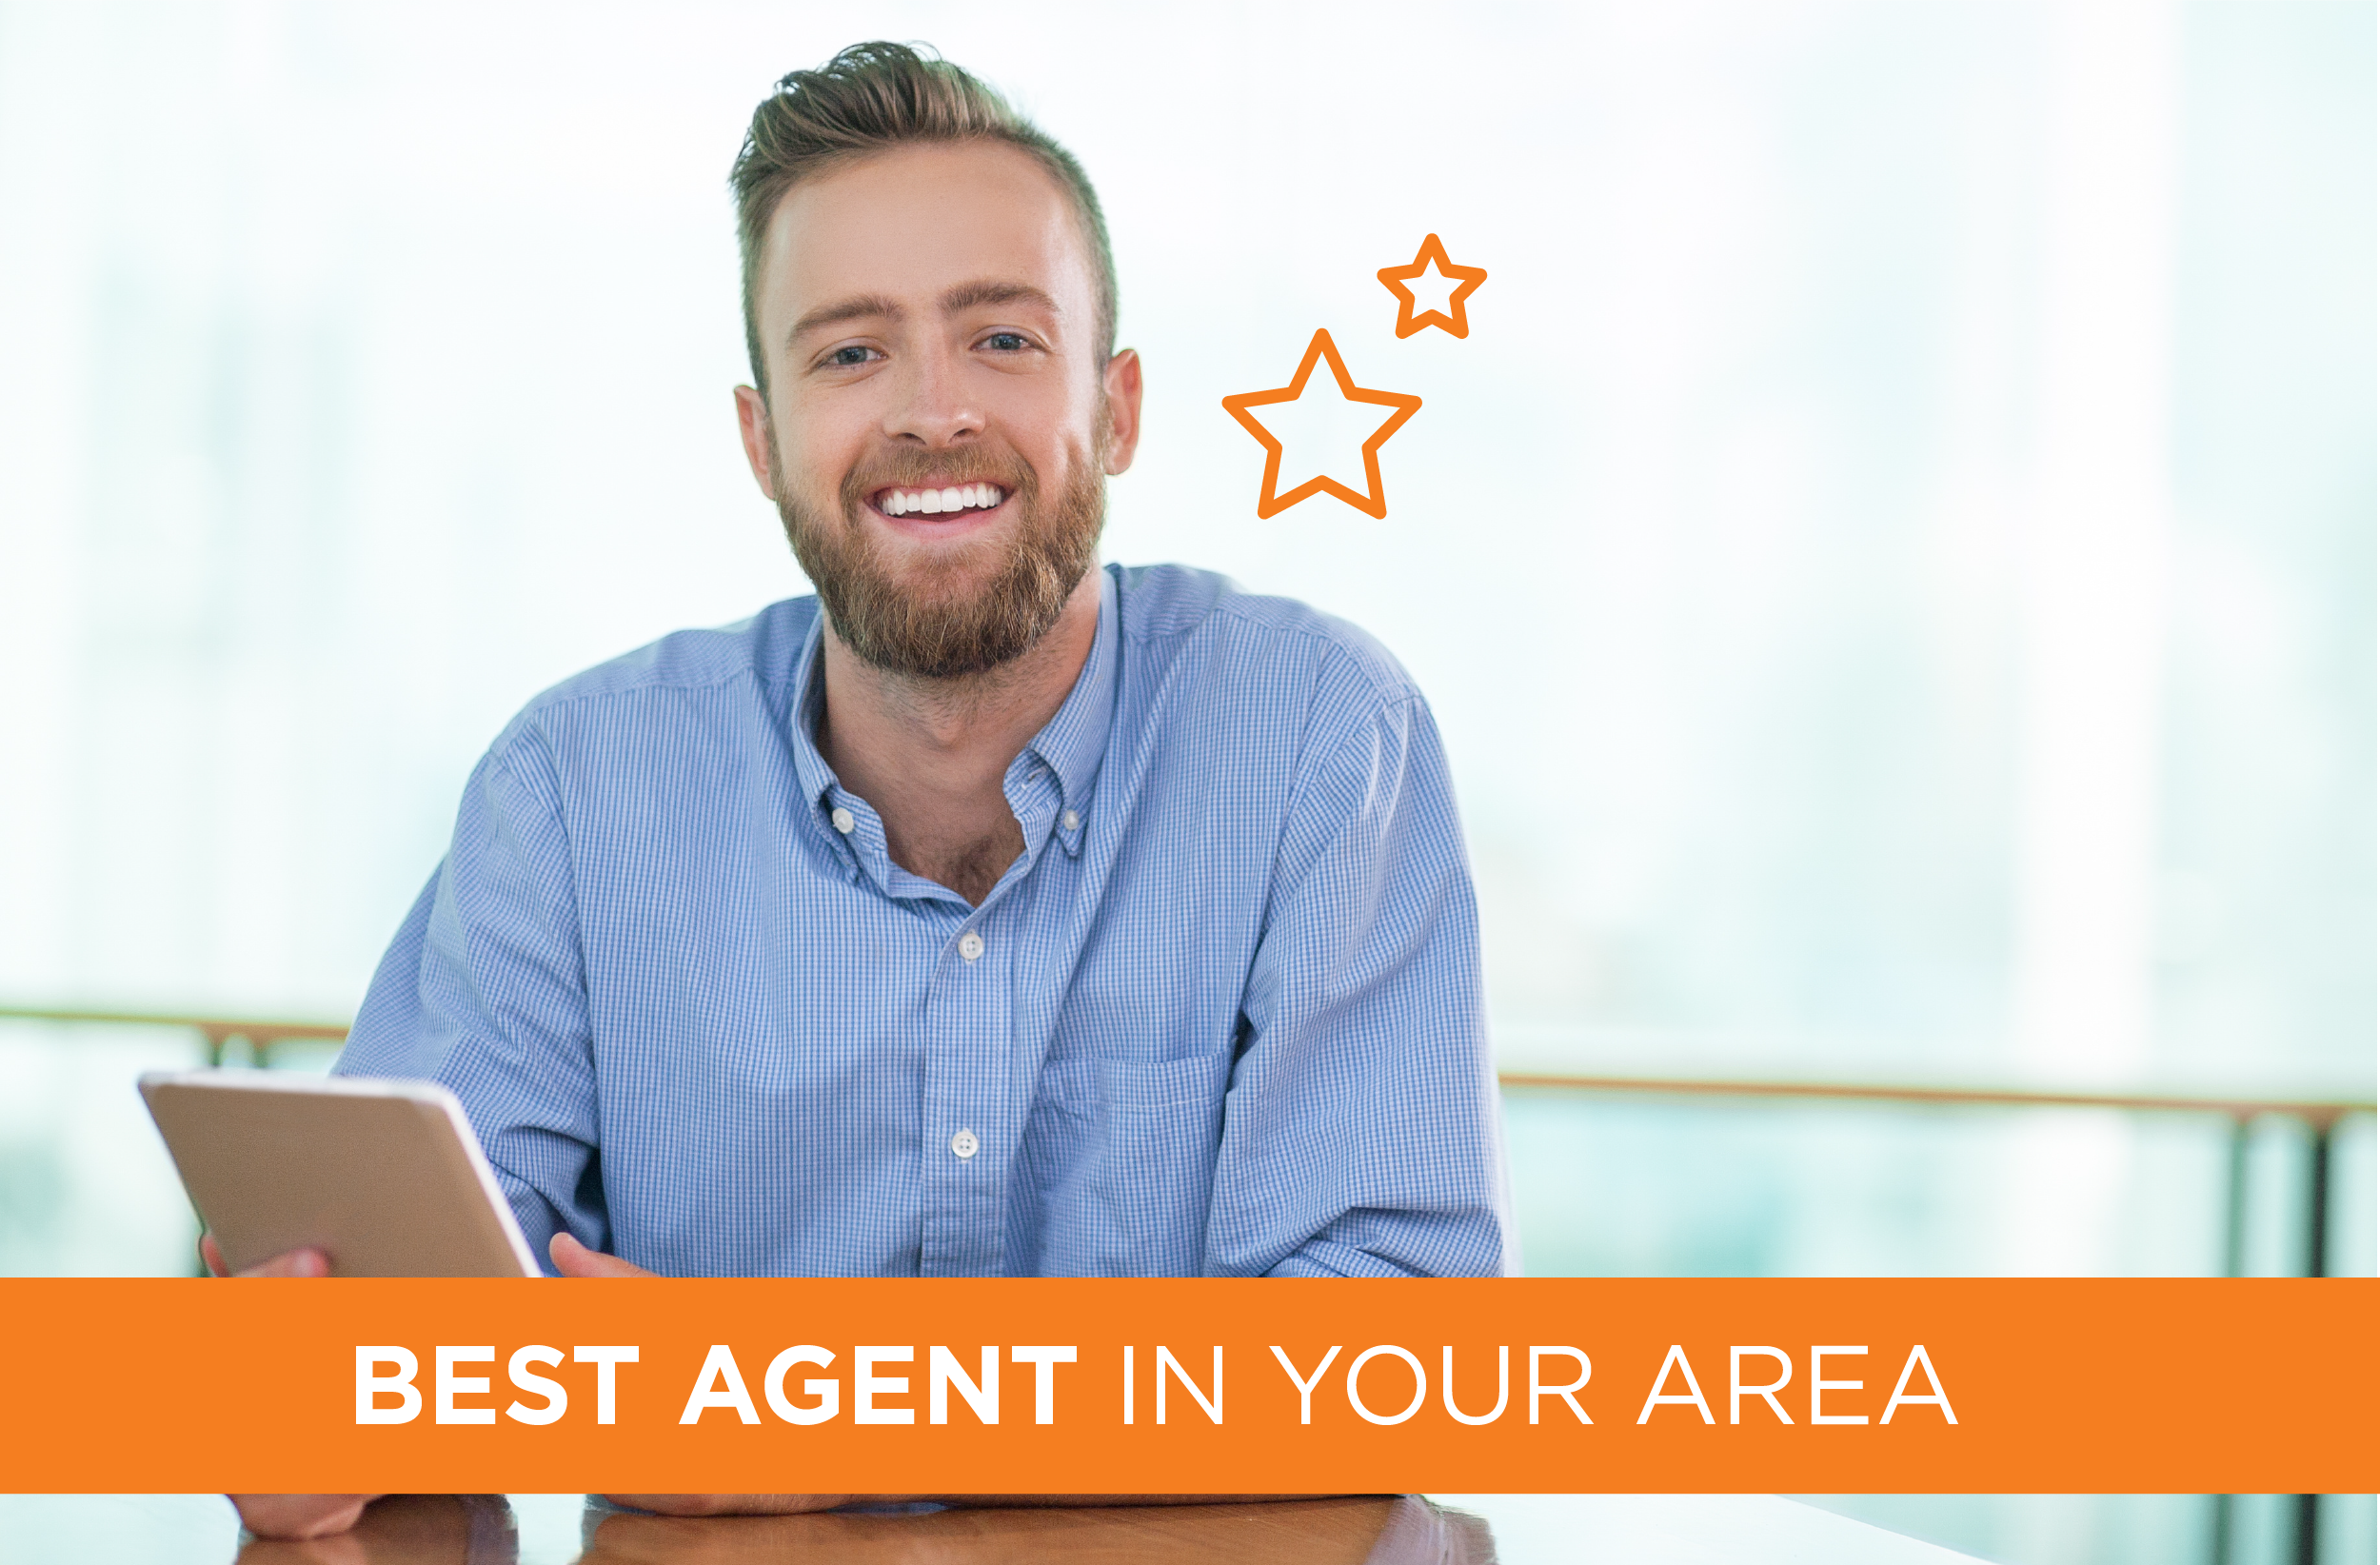 10 Tips For Becoming the Best Real Estate Agent in Your Area